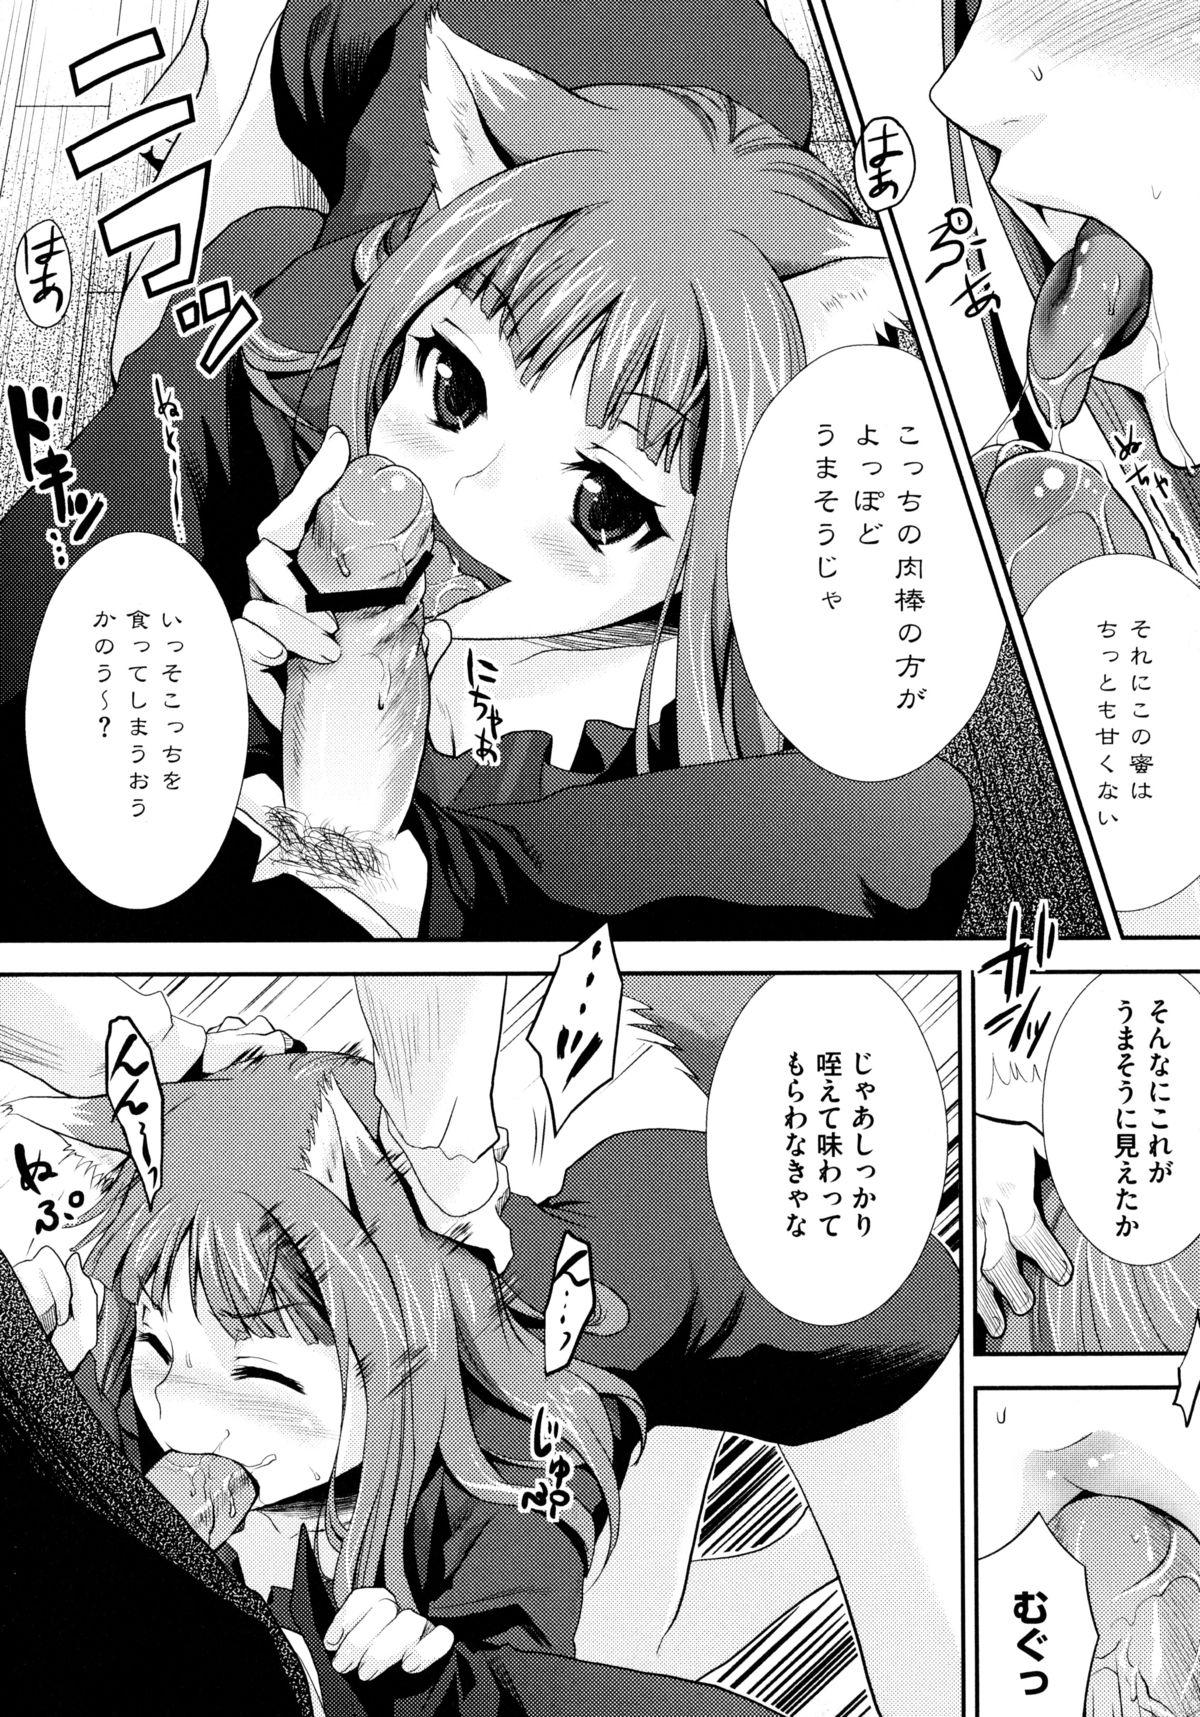 Sextoy Ookami Musume to Inkou no Tabi - Spice and wolf Celebrity - Page 10